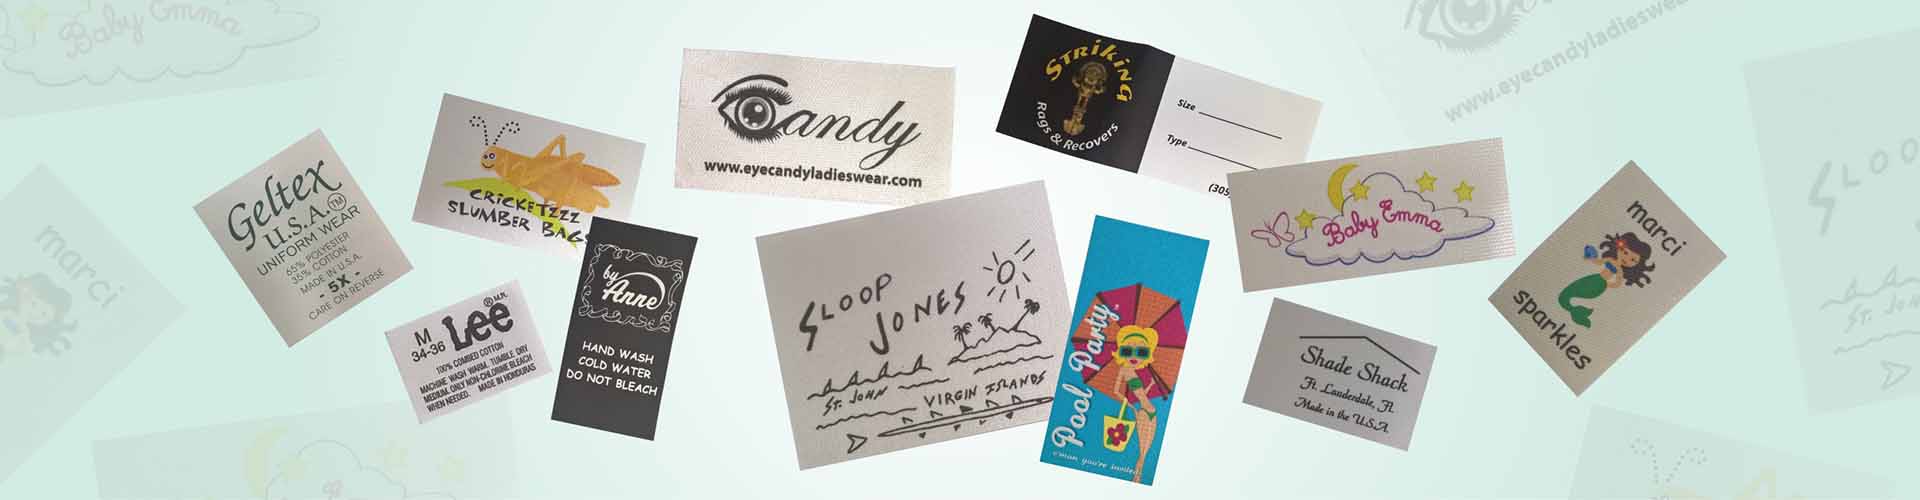 custom-other-products-printed-labels